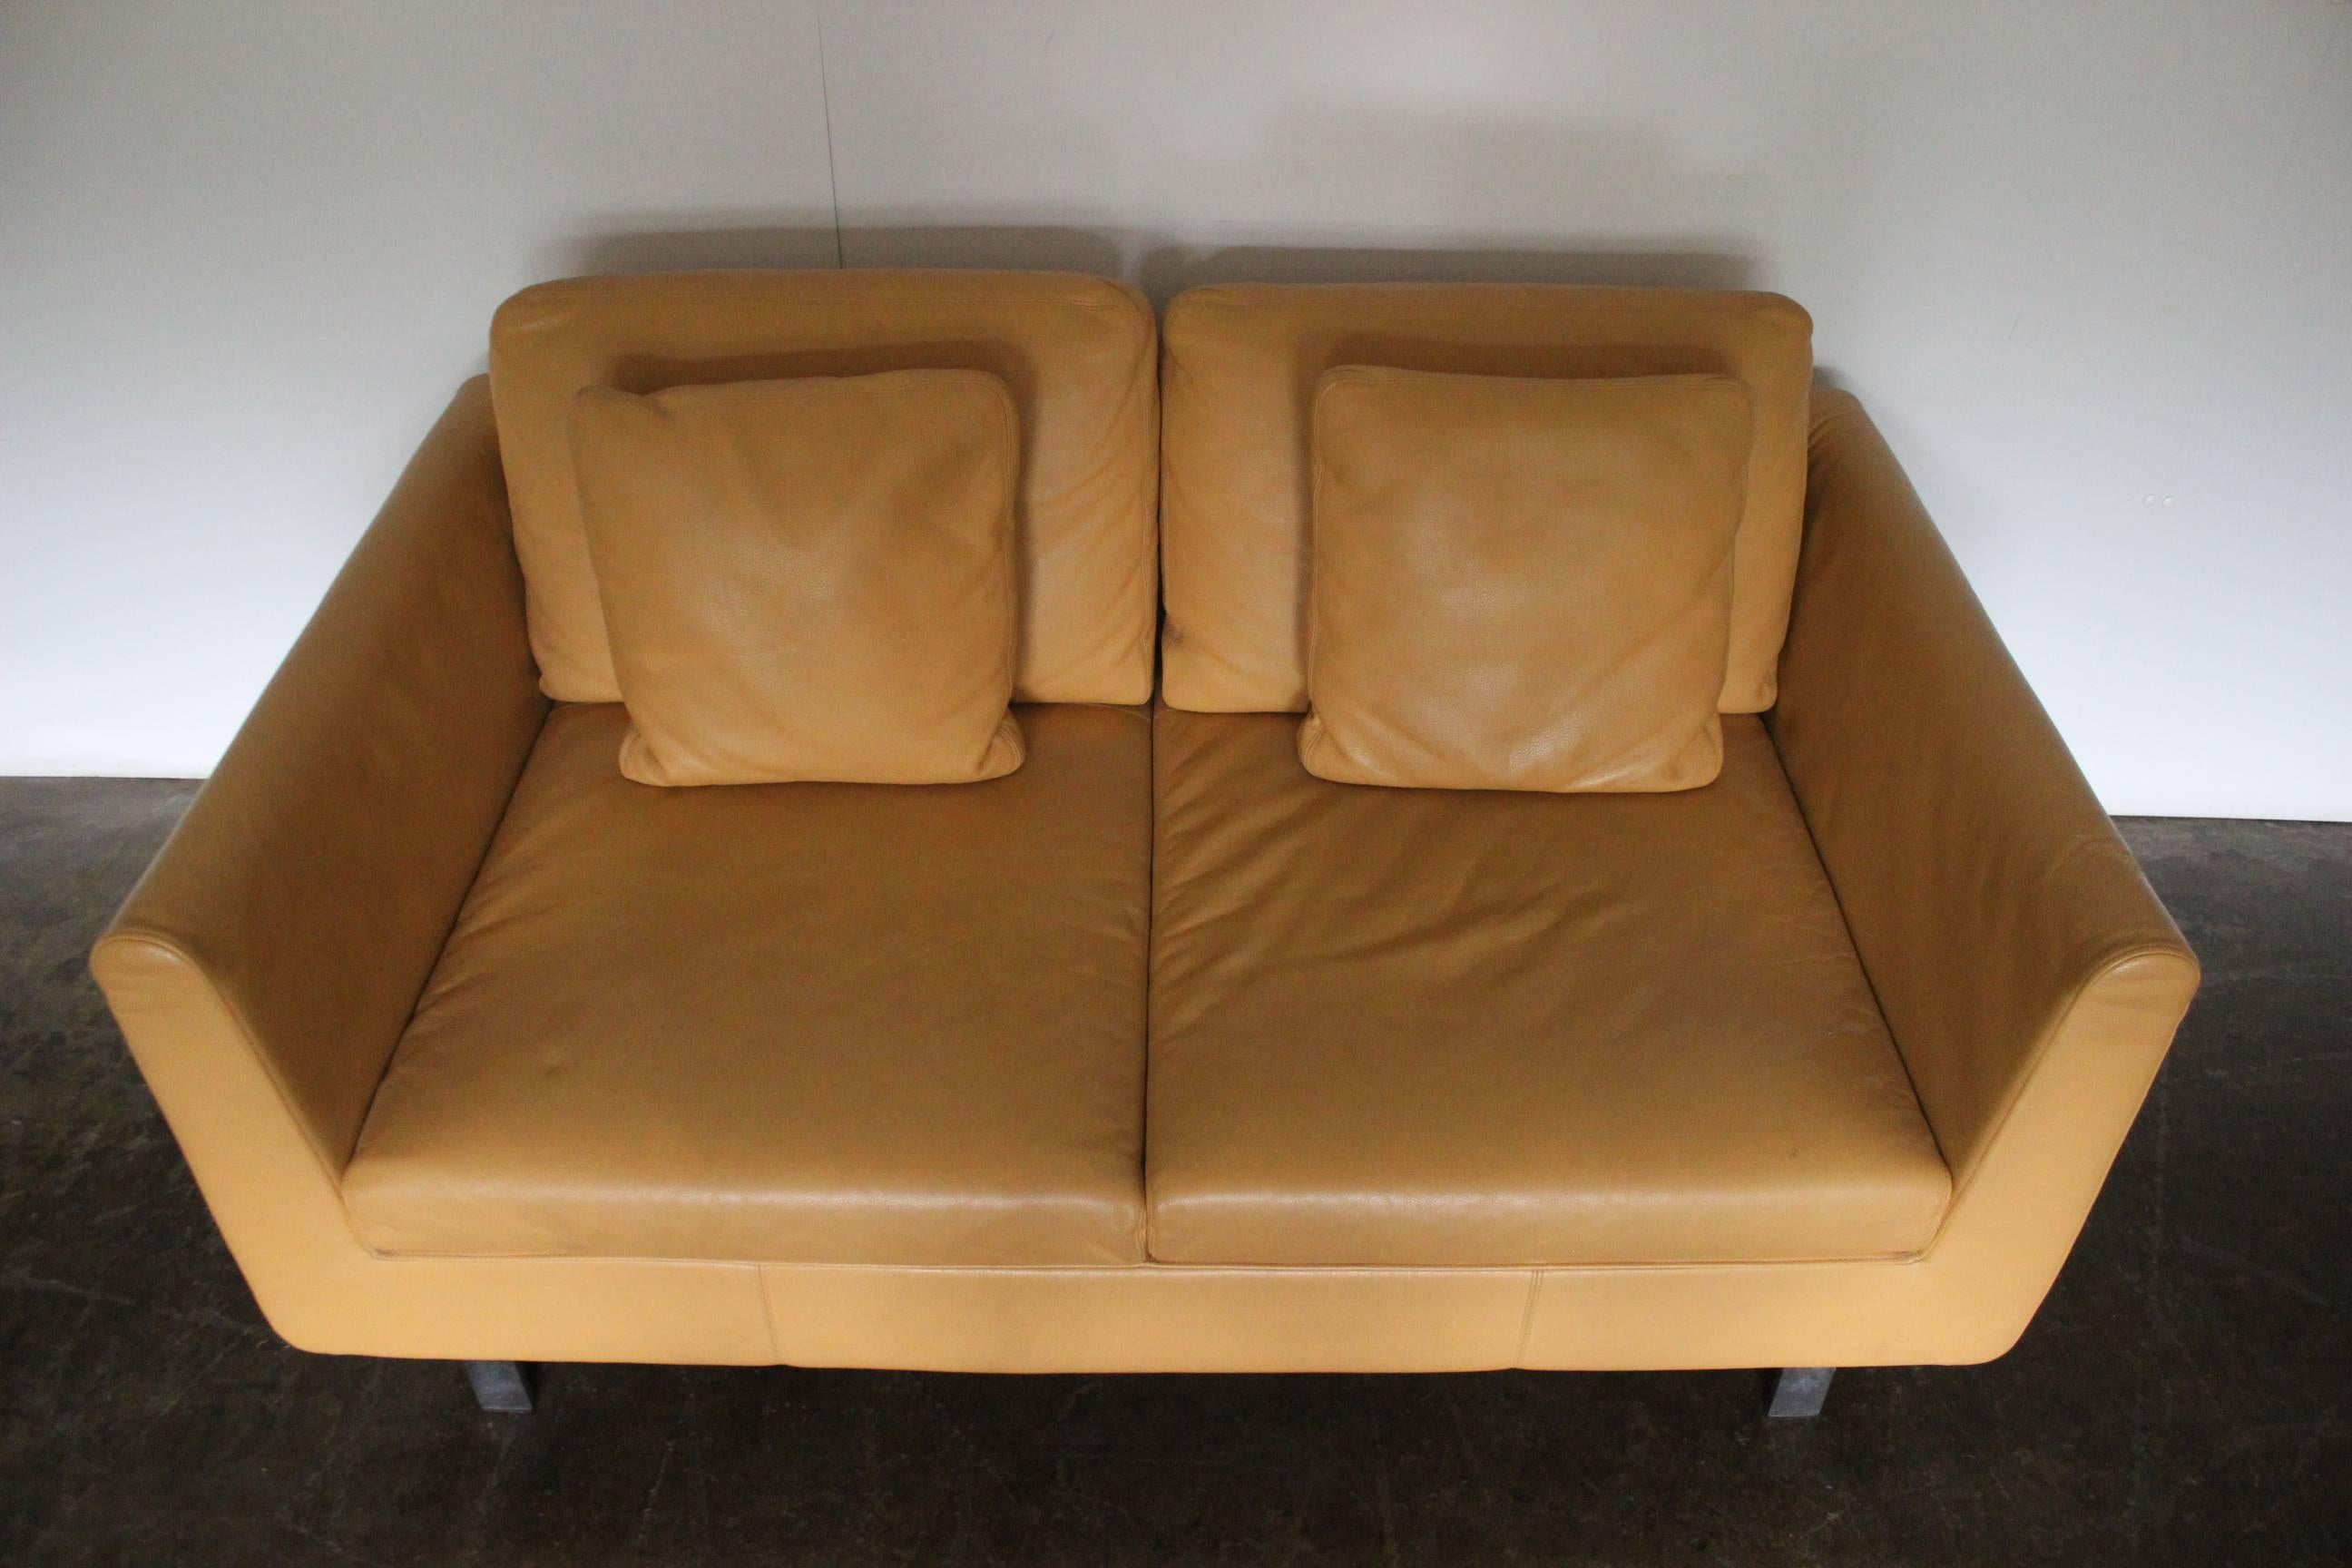 Pair of Walter Knoll Two-Seat Sofas in Pristine Pale-Tan Leather 2